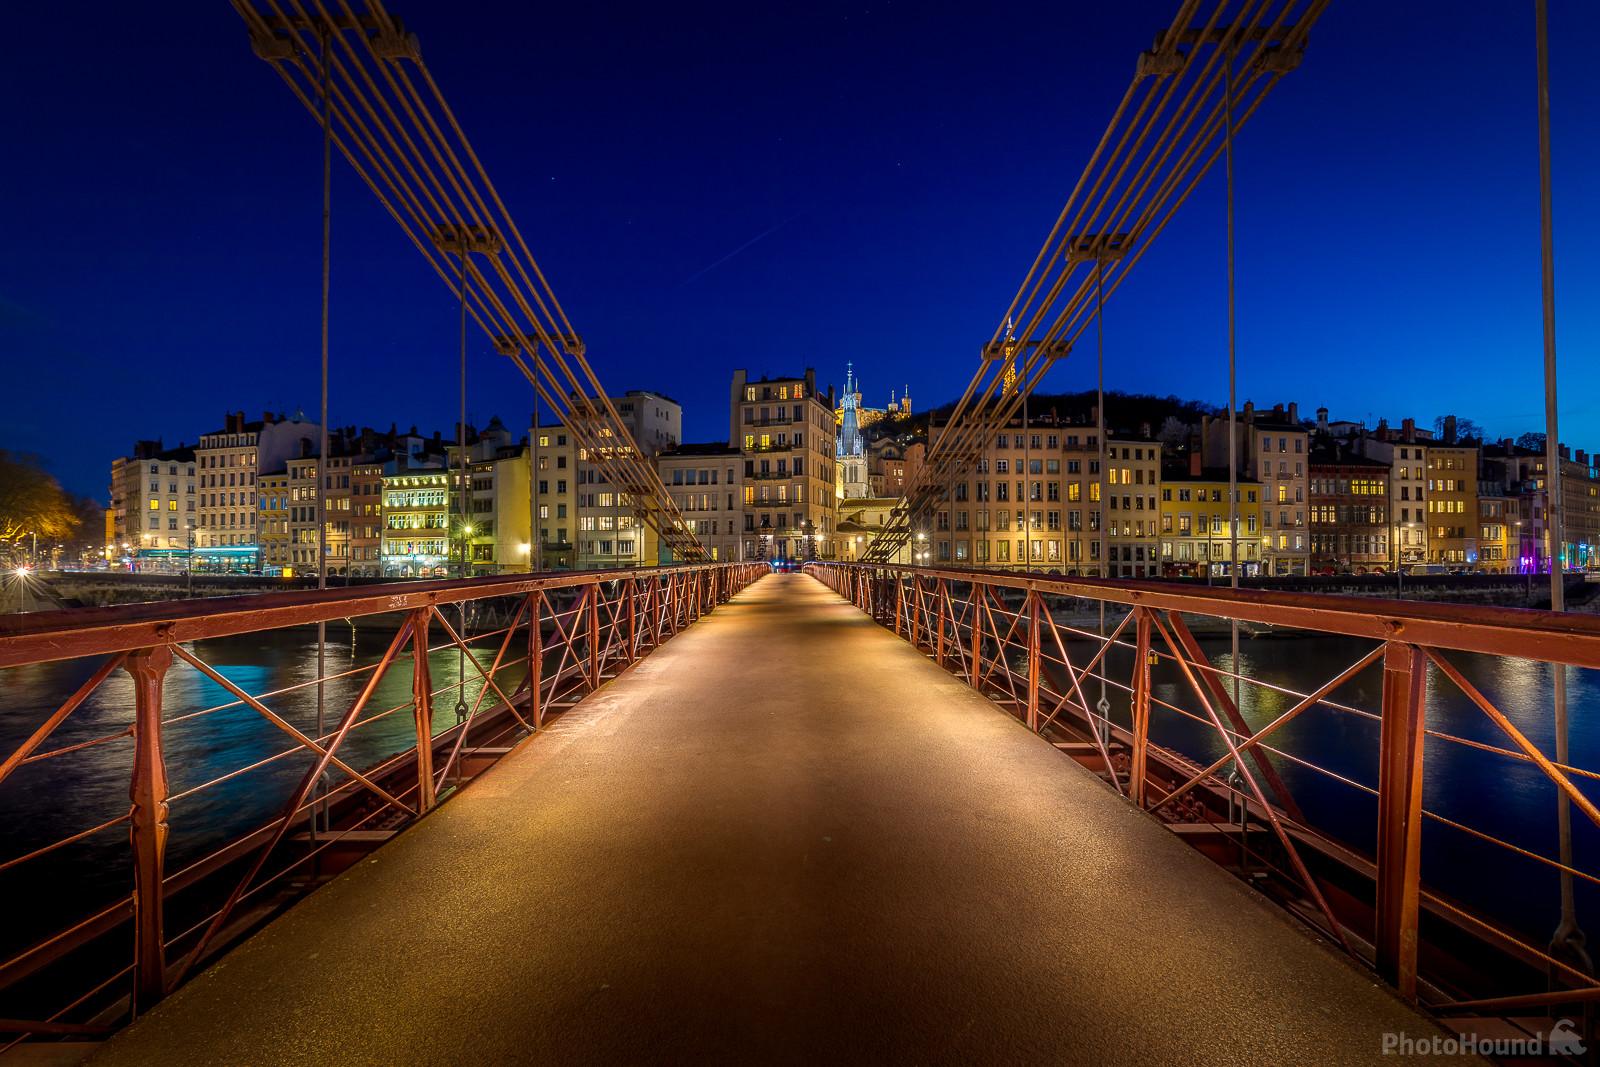 Image of The Saone view from the St-Vincent Footbridge by Frédéric Monin